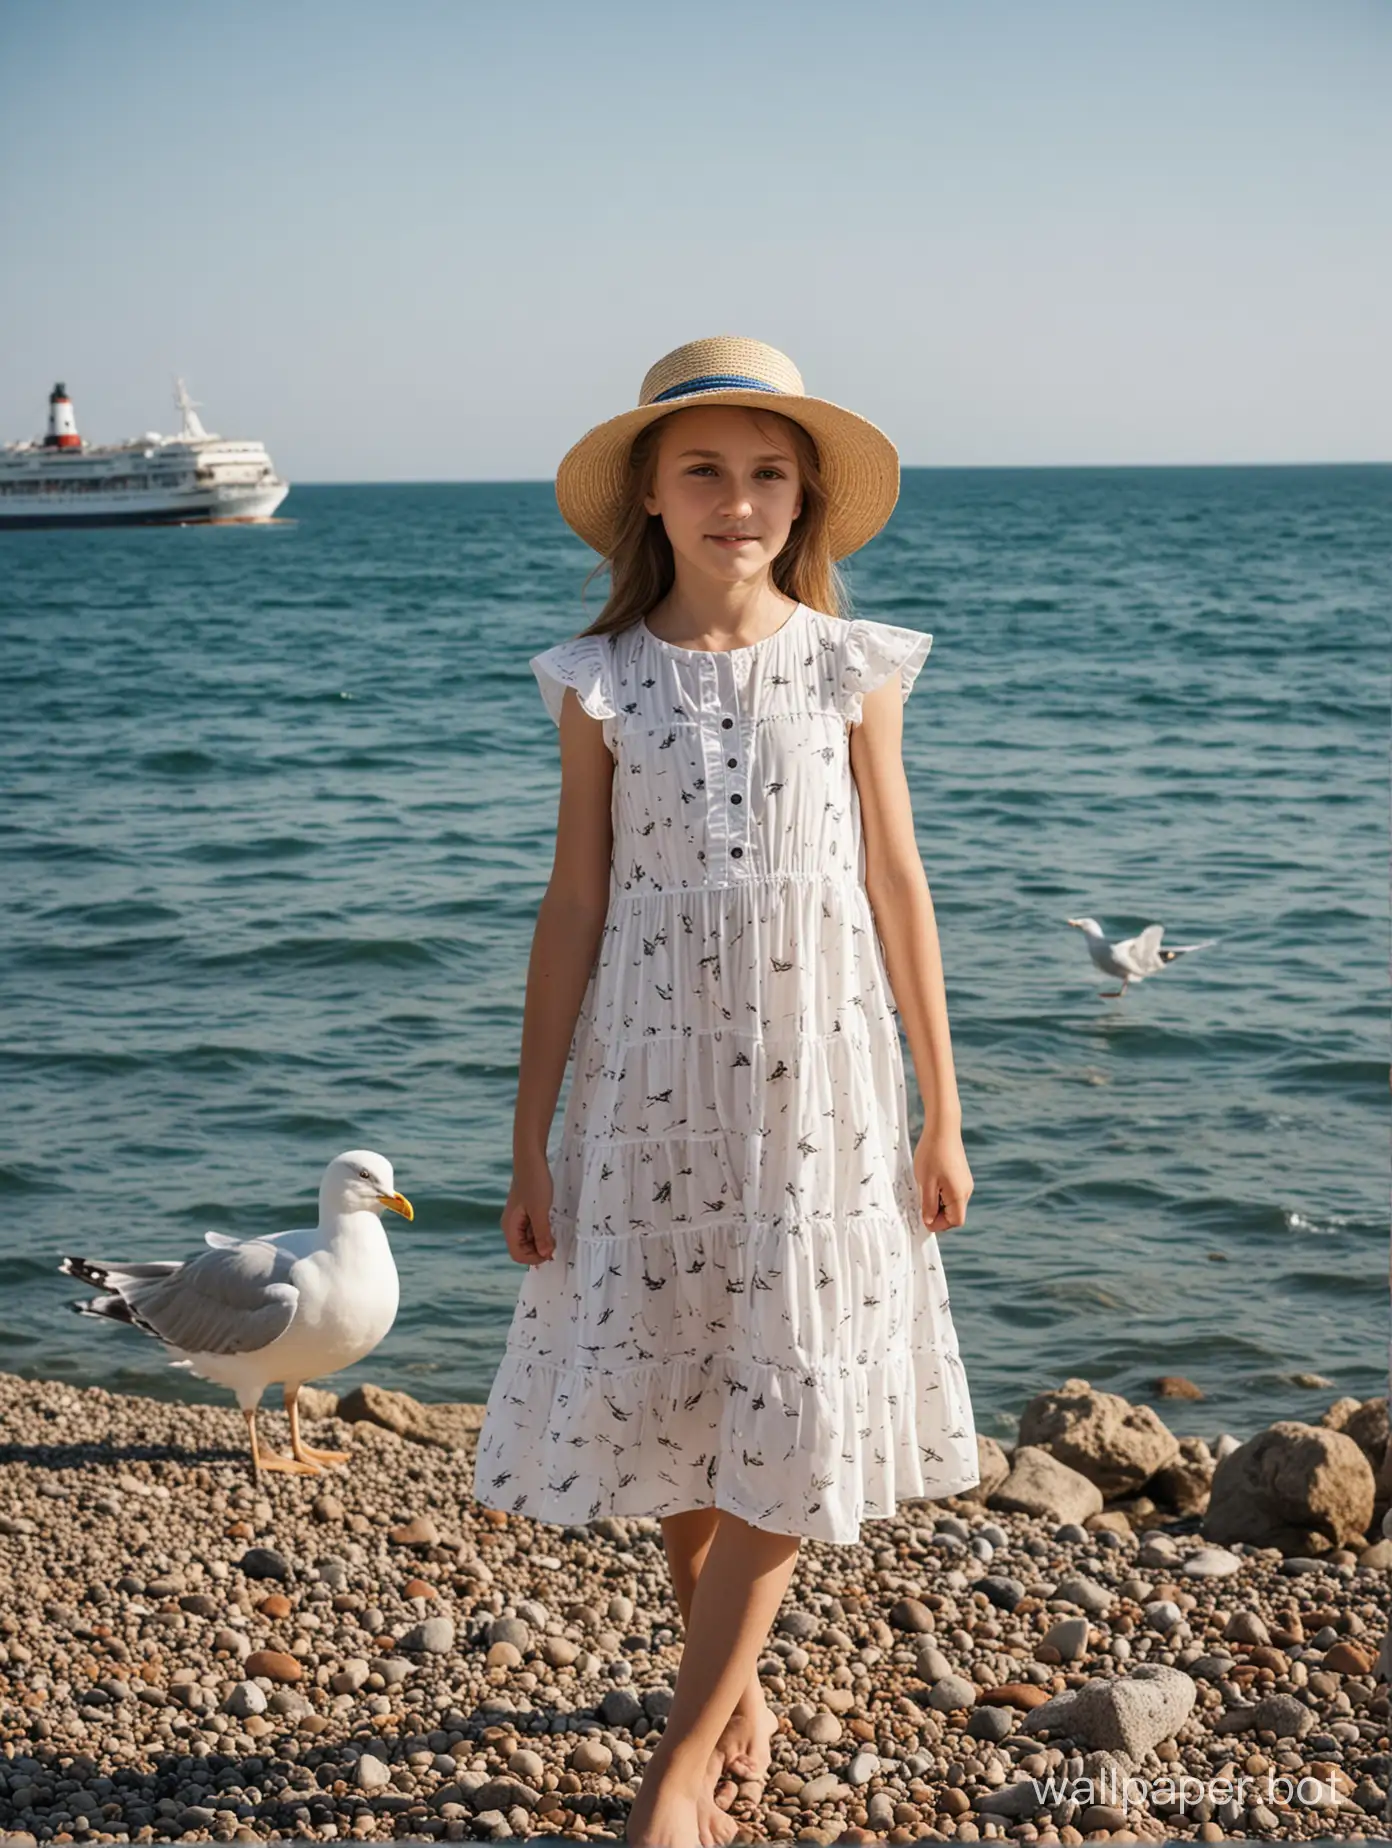 Black Sea, Crimea, 11-year-old girl in a summer dress and hat, in full height, ship in the distance, seagull, transparent dress